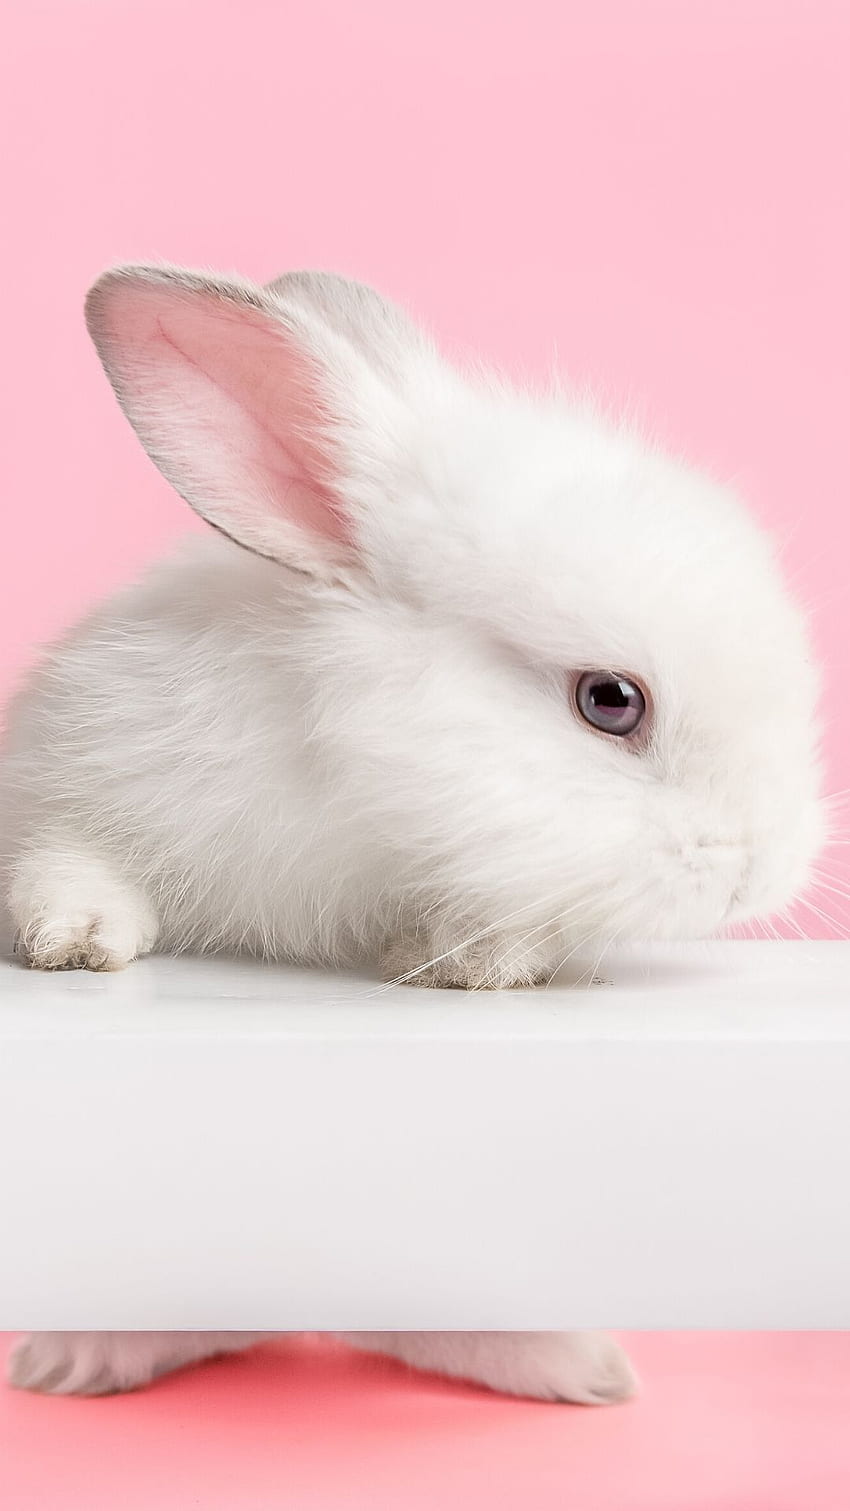 Cute Bunny HD Wallpapers:Amazon.co.uk:Appstore for Android